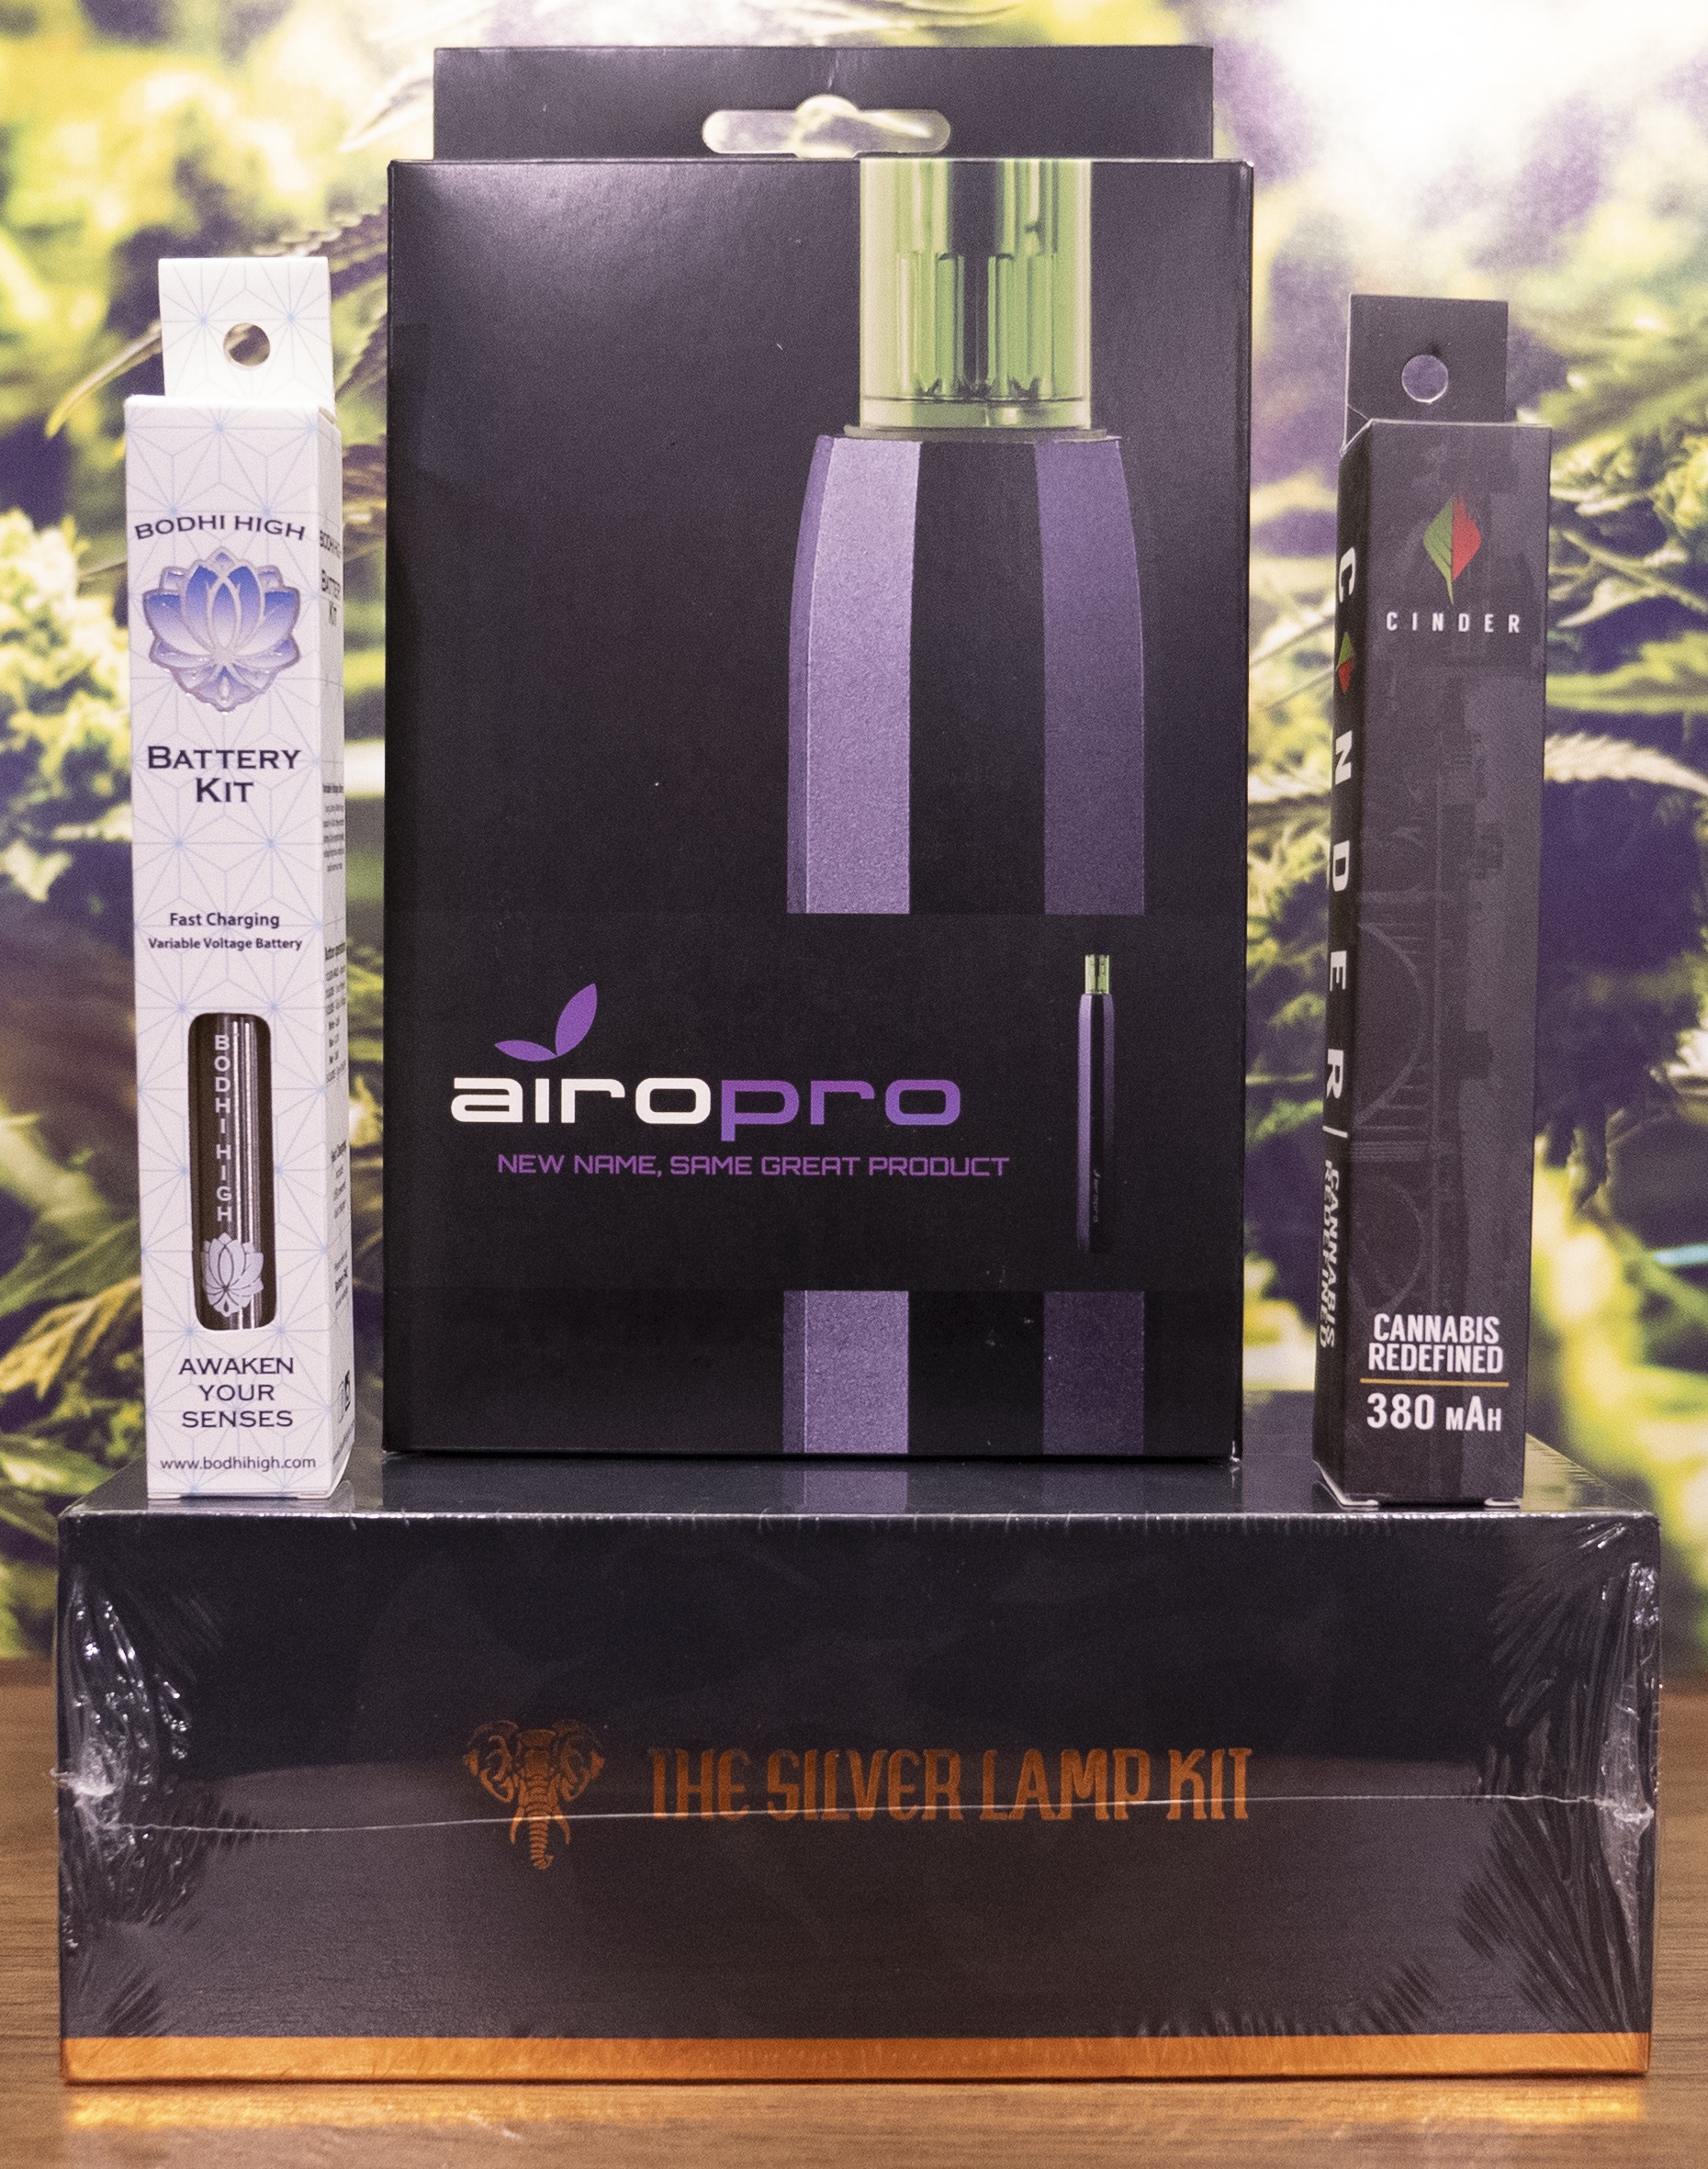 Vape Pens | The Perfect Gift Here at Cinder